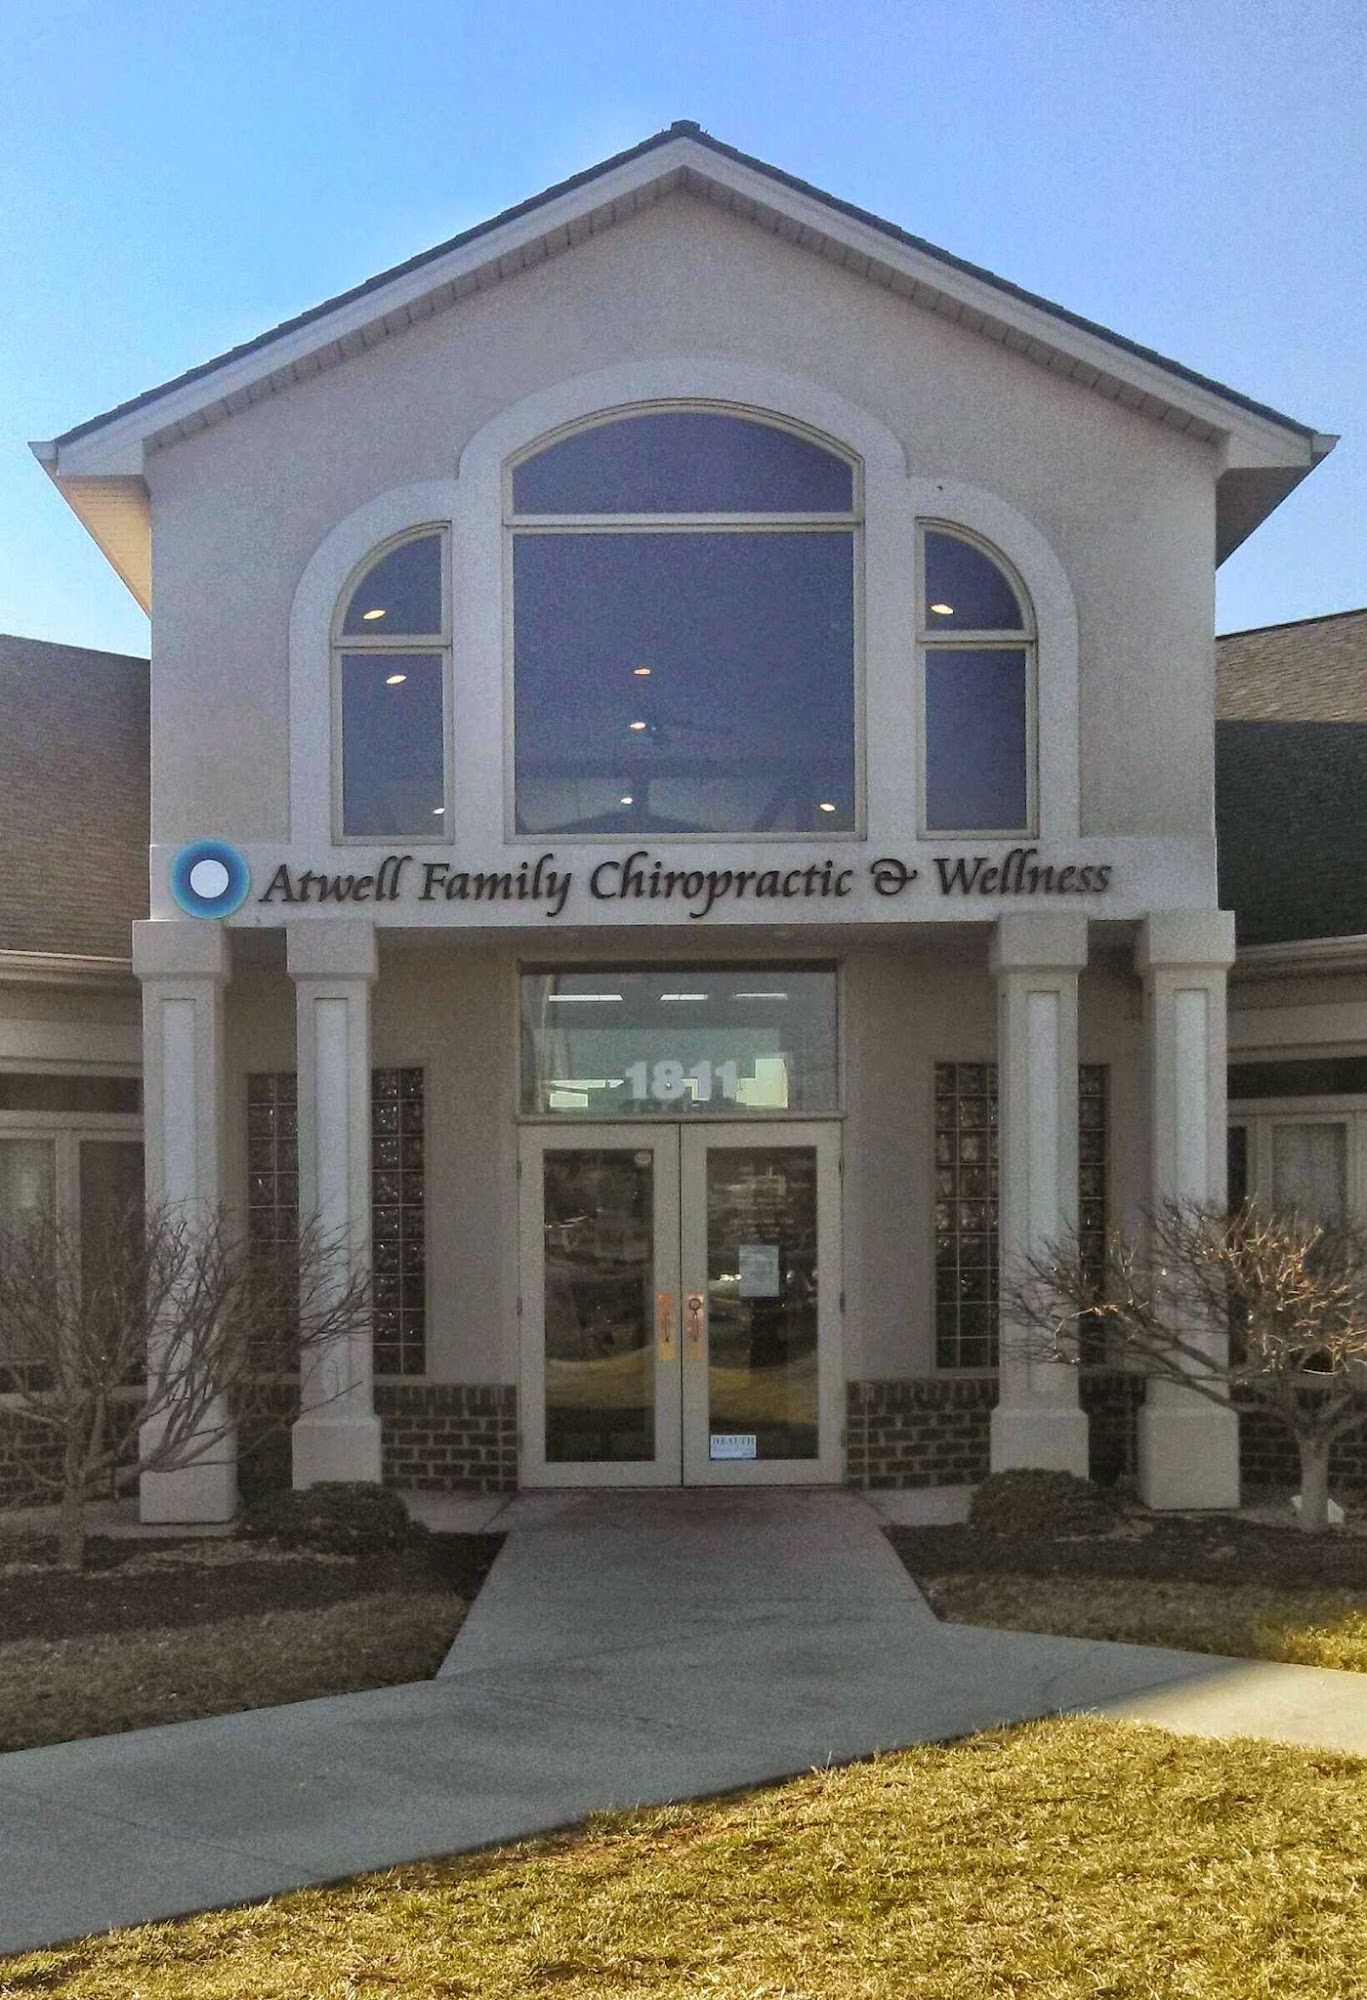 Atwell Family Chiropractic: A Creating Wellness Center